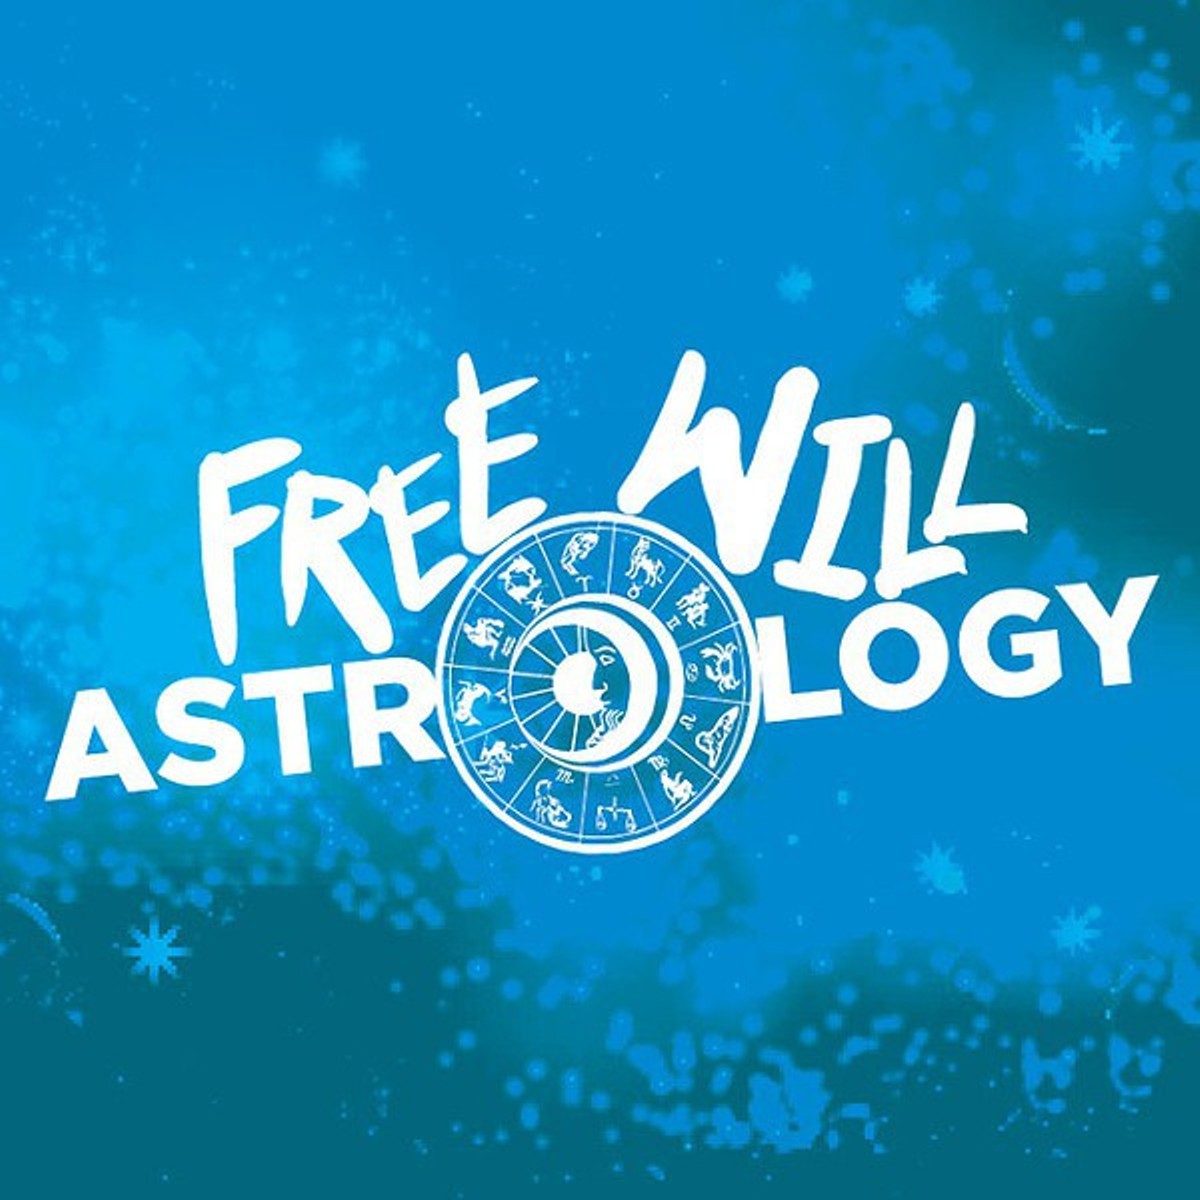 Free Will Astrology (10/21/15)